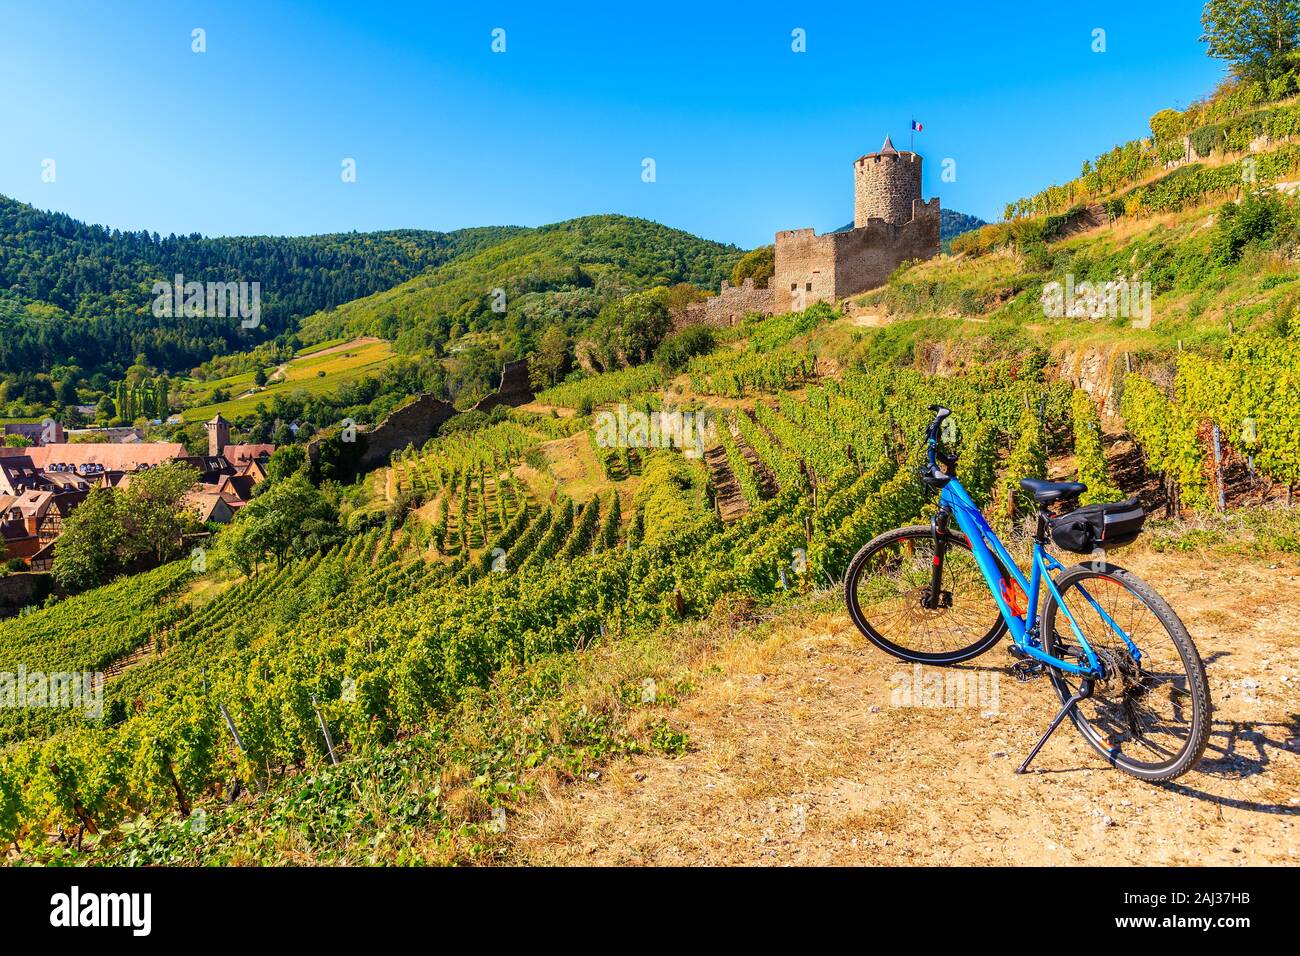 Bicycle among vineyards and view of Kaysersberg castle, Alsace Wine Route, France Stock Photo